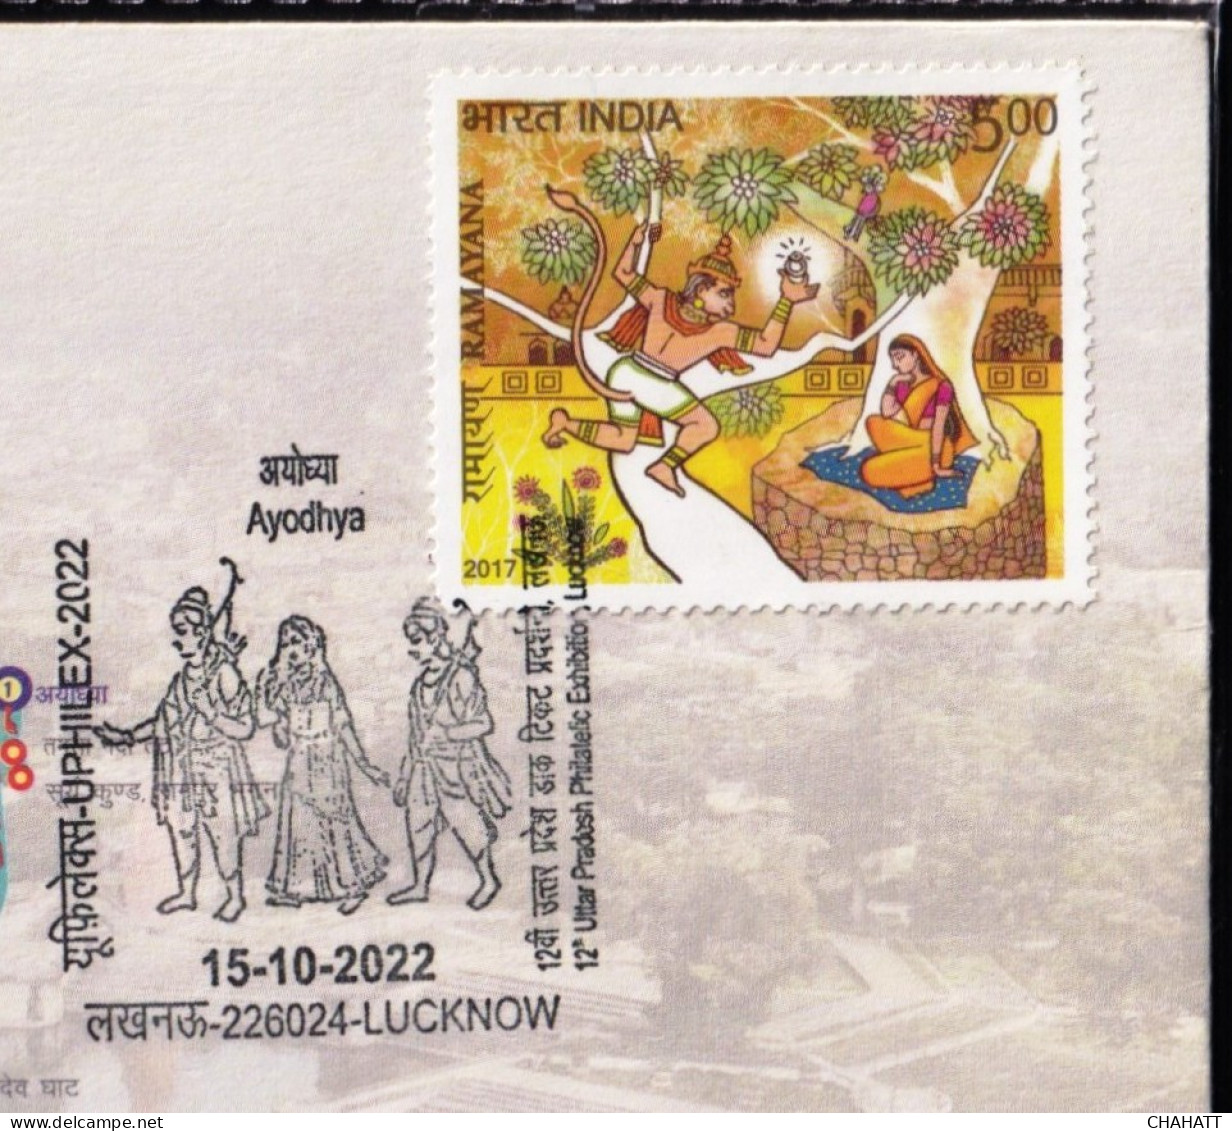 HINDUISM - RAMAYAN-  ARCHERY, AYODHYA - PICTORIAL CANCELLATION - SPECIAL COVER - INDIA -2022- BX4-23 - Hindouisme